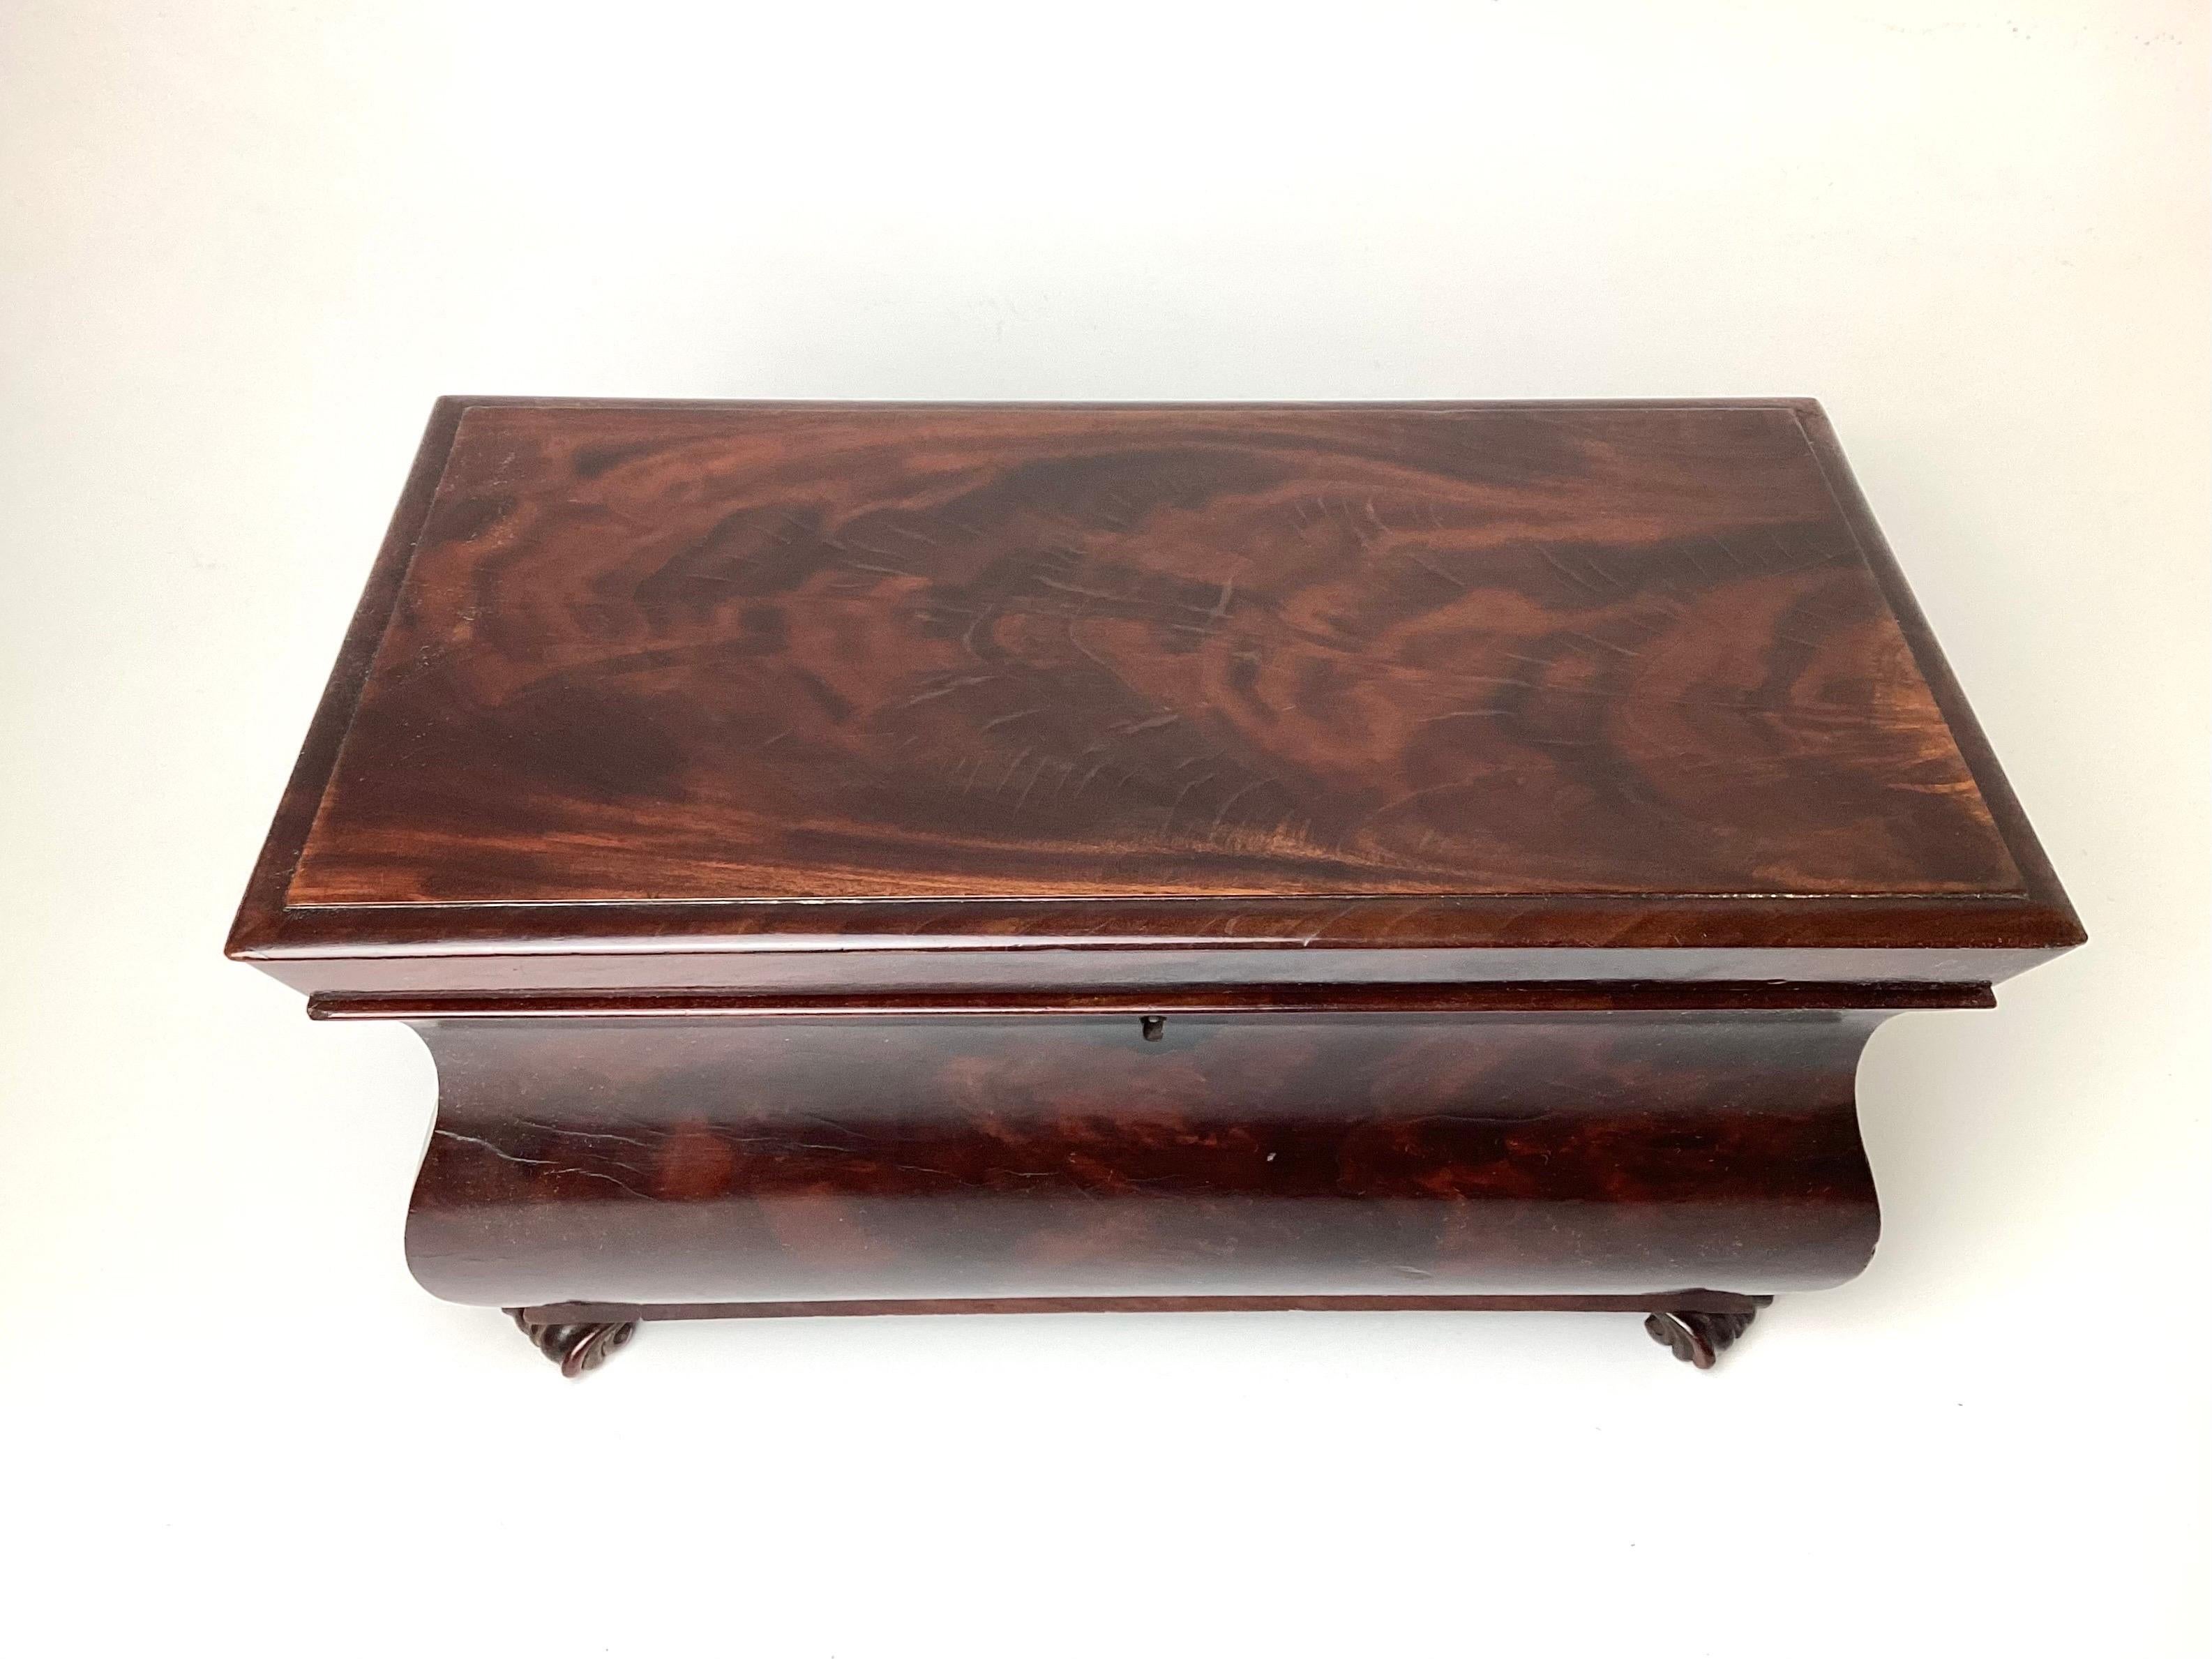 Antique English Regency Mahogany Tea Caddy In Excellent Condition For Sale In Lambertville, NJ